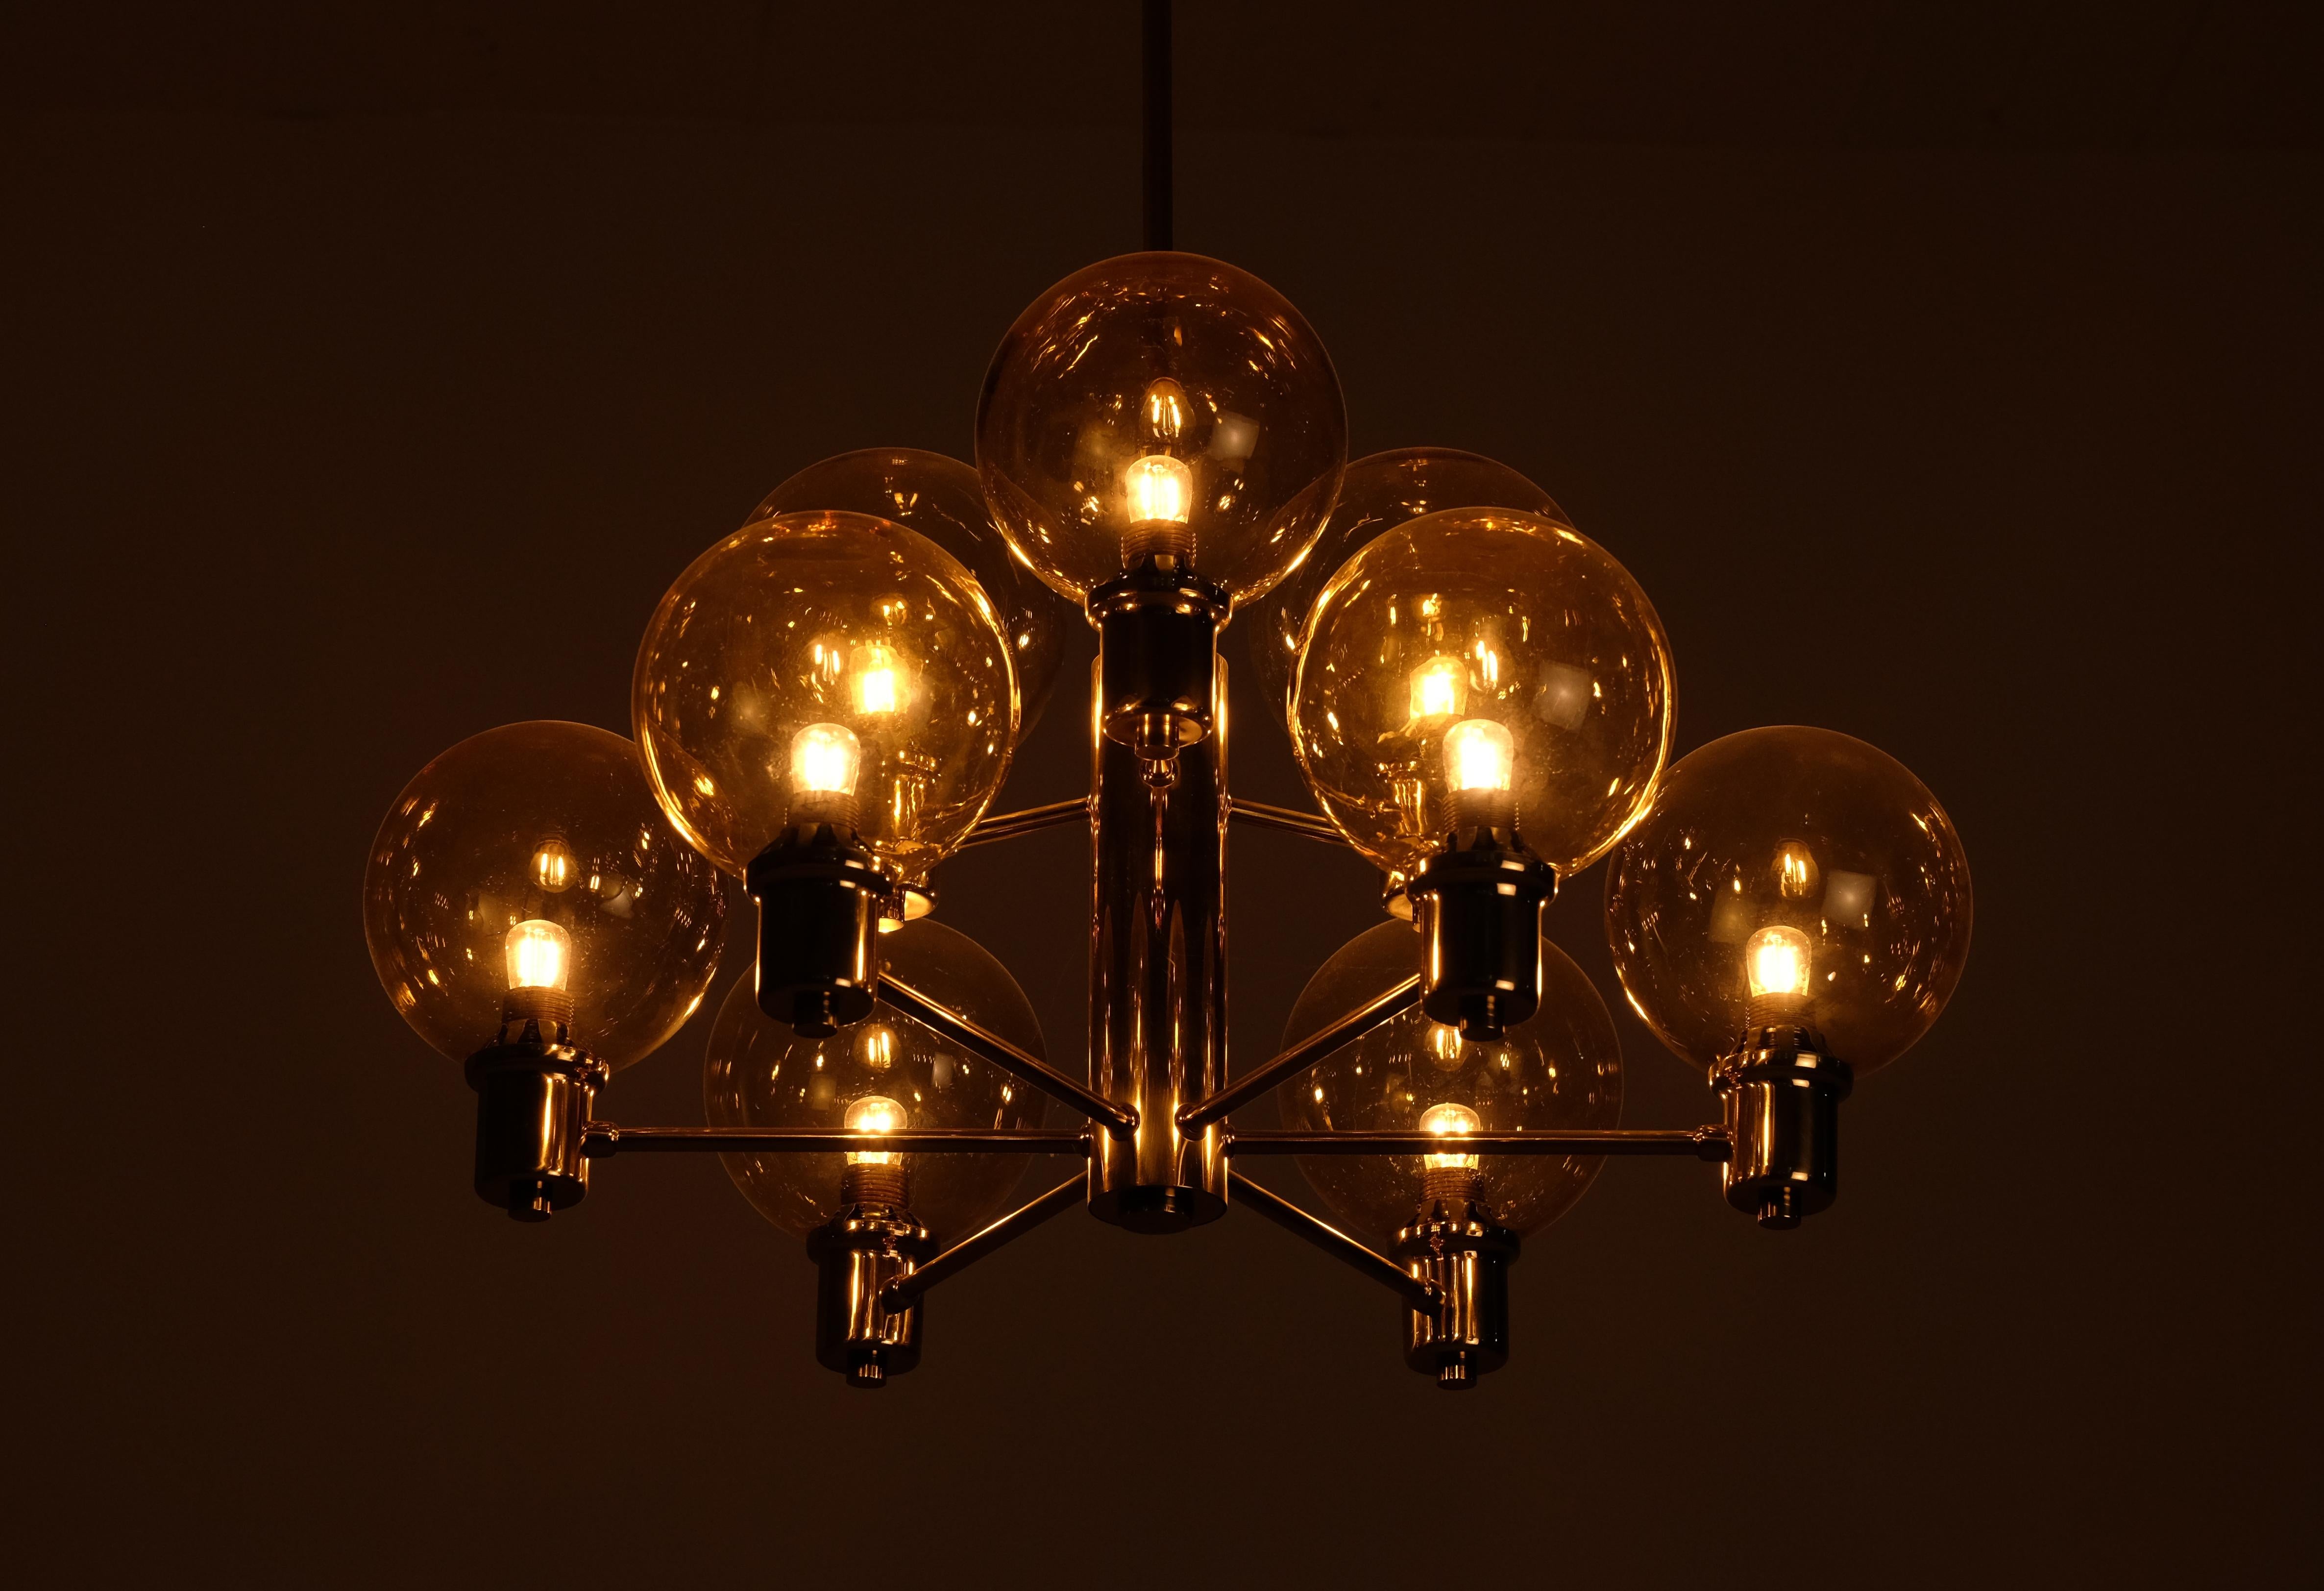 Brass & glass chandeliers by EWÅ, Sweden, 1960s.
Please note: Listed price is for a single chandelier. 